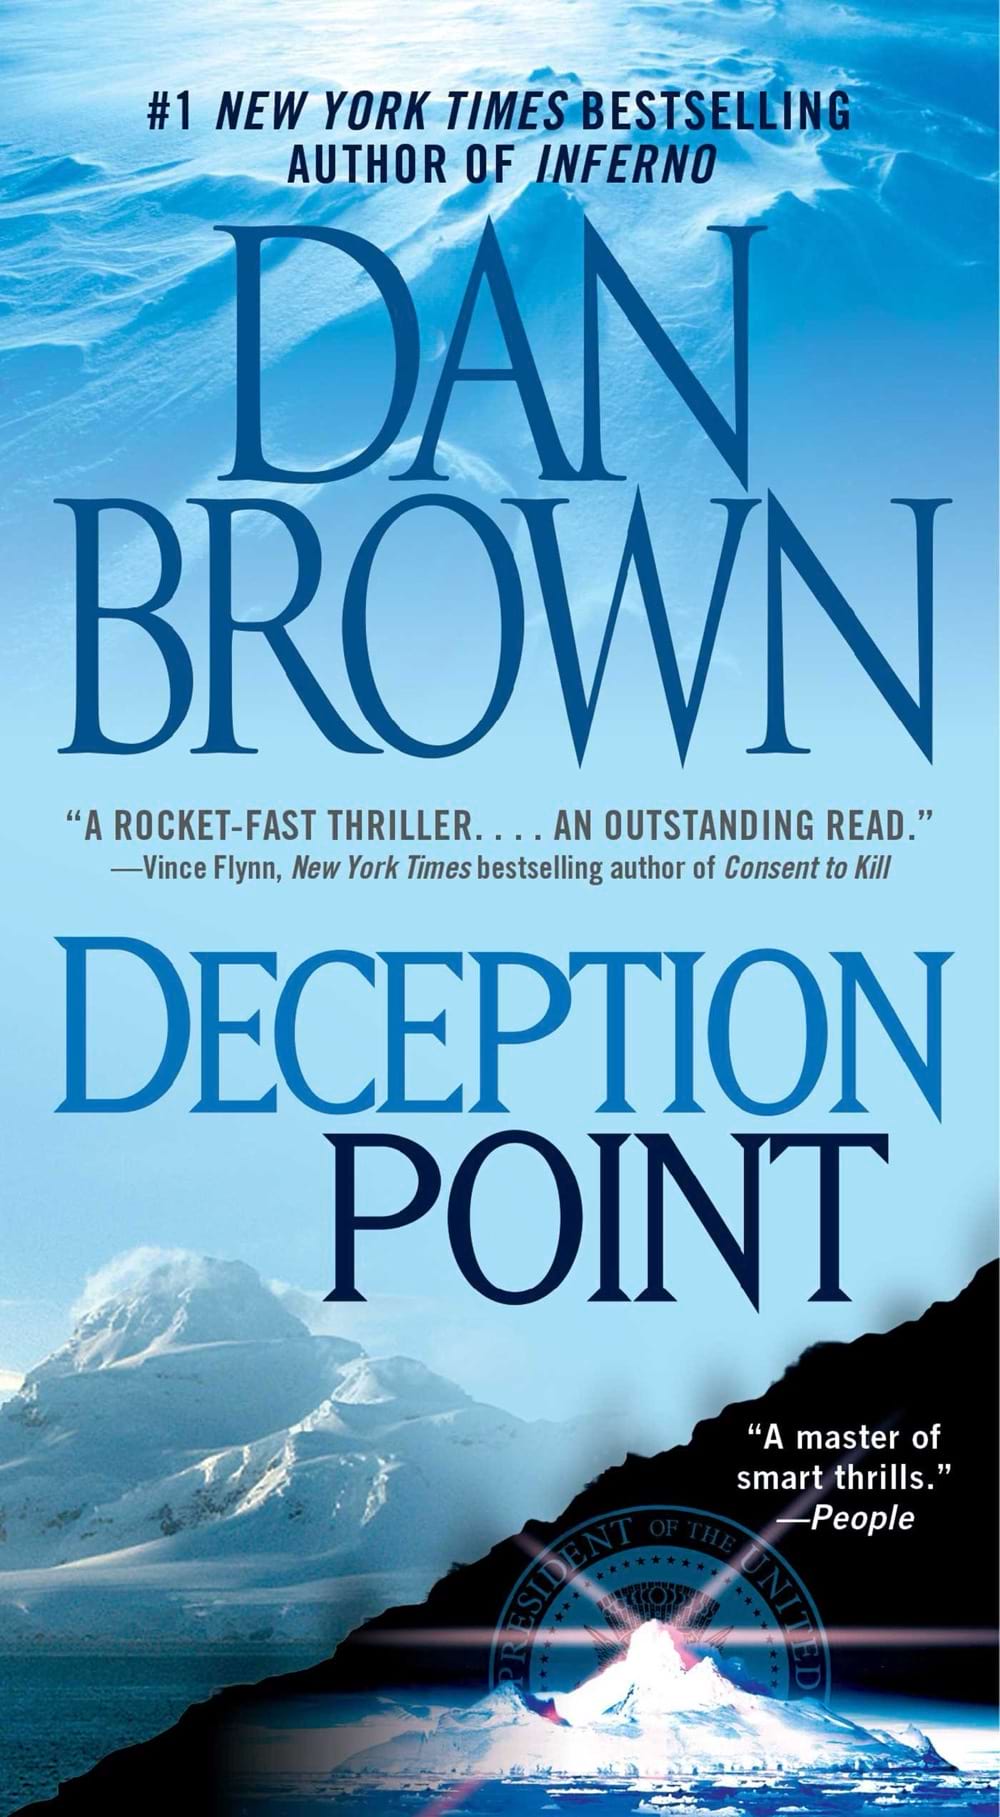 The cover of Deception Point